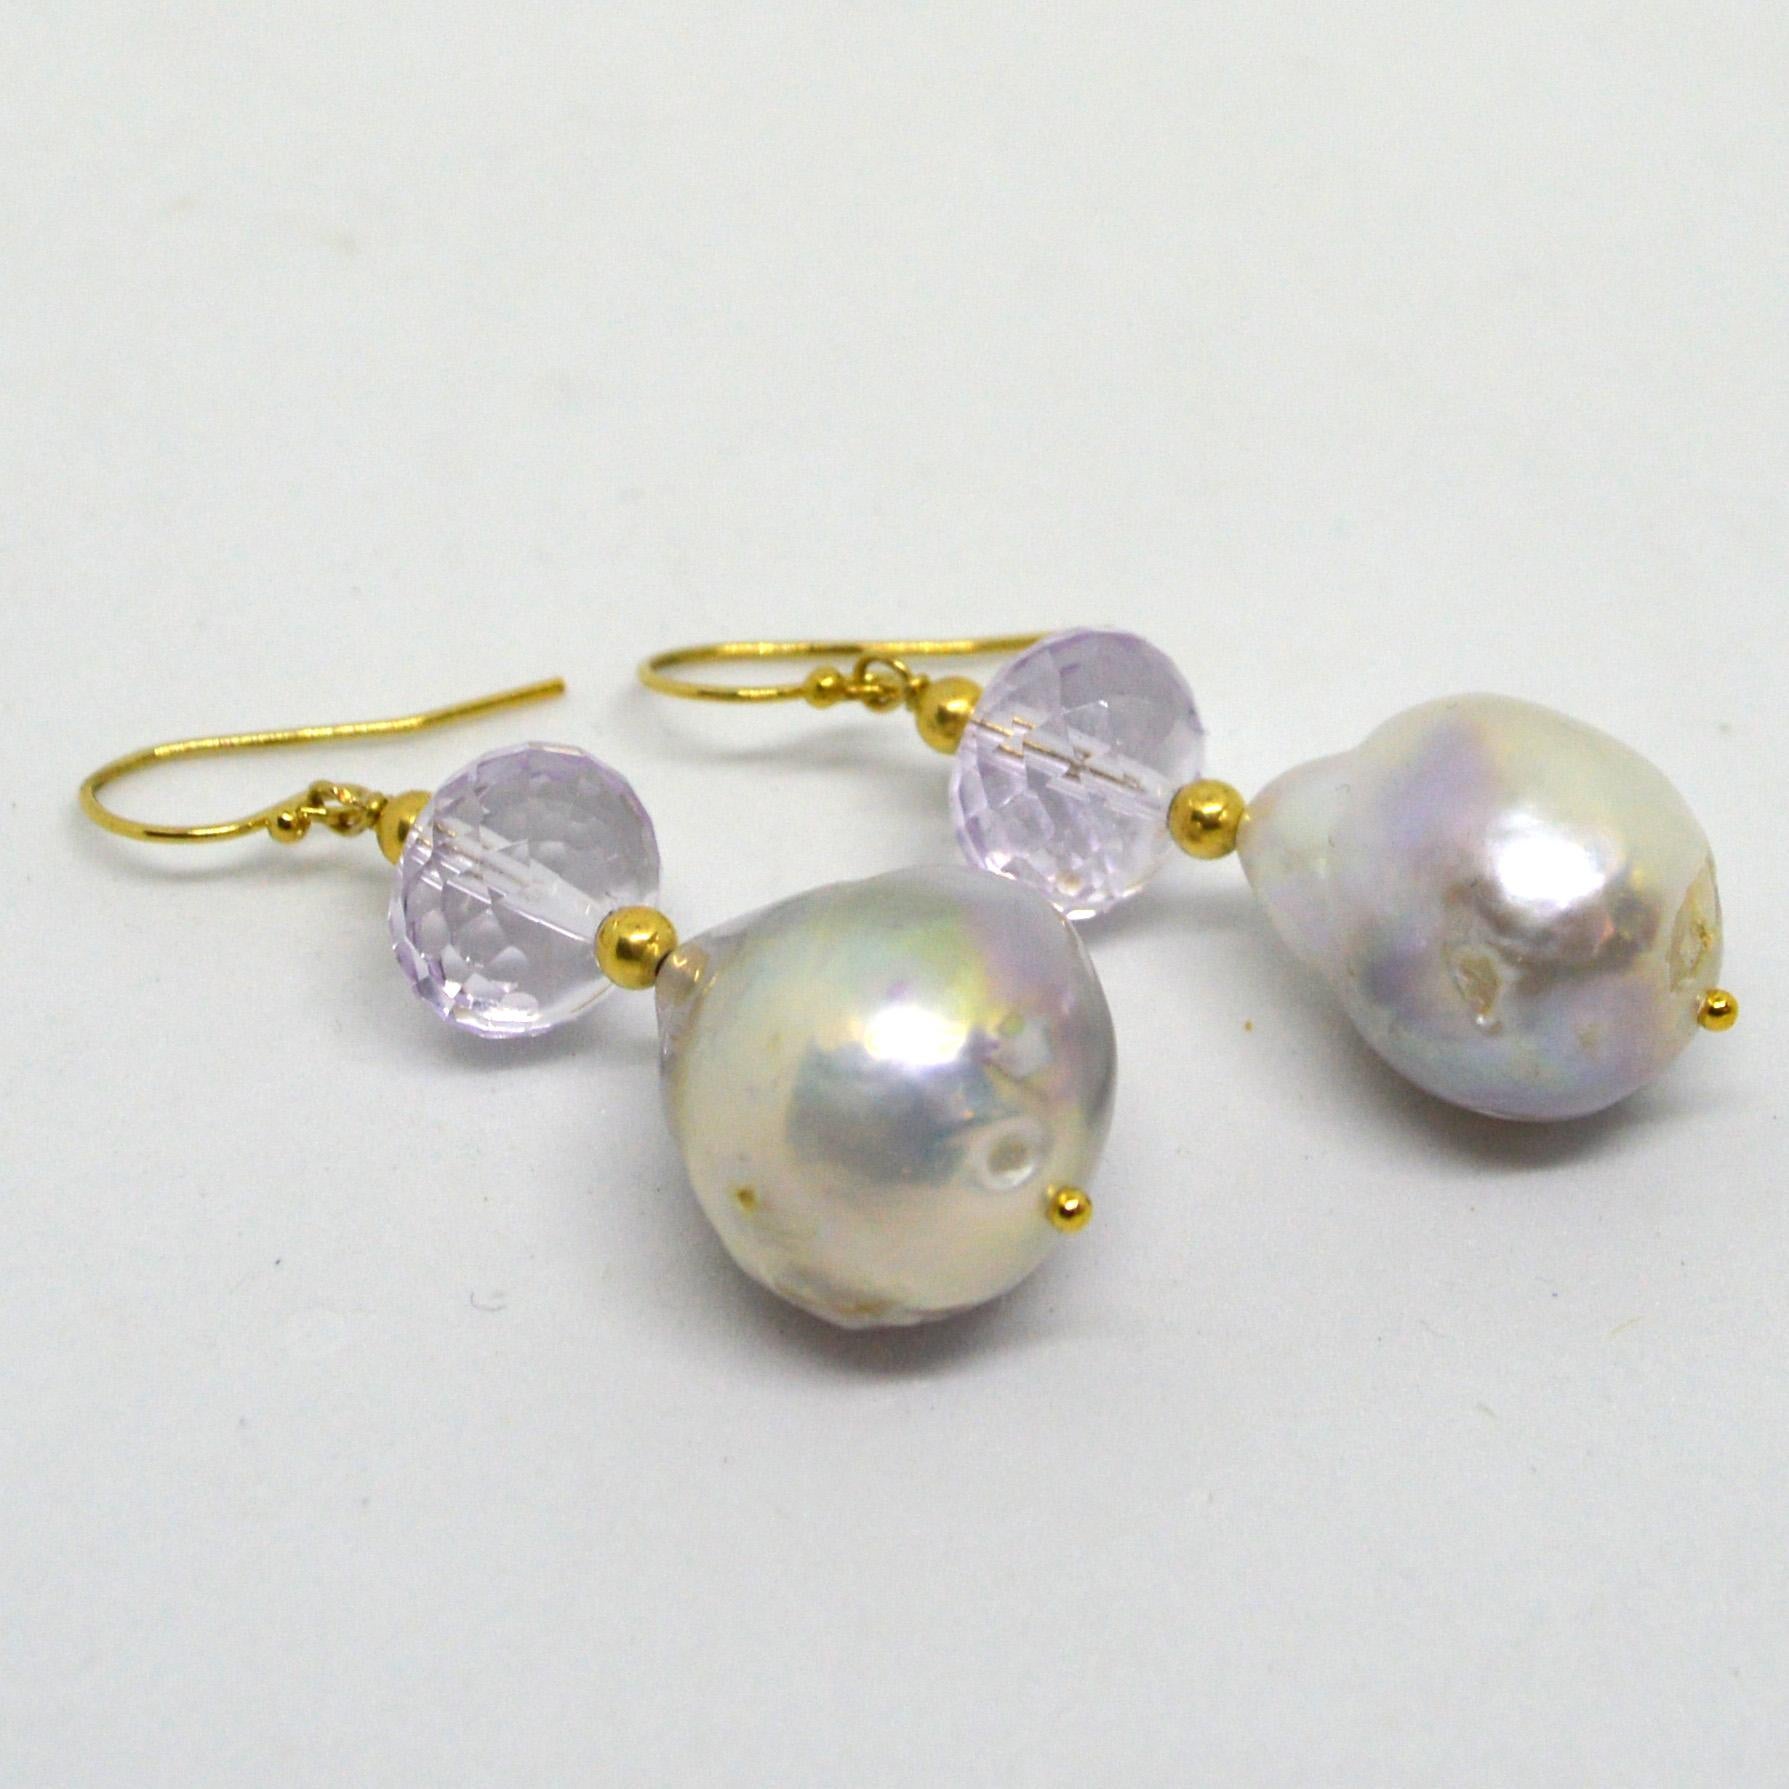 Stunning Faceted Pink Amethyst with a high Quality Pink Baroque Fresh Water Pearl.
Amethyst Beads measure 11x8mm with a 17x15mm Pearl.
All findings are 14k Gold Filled
length of Earrings is 42mm

